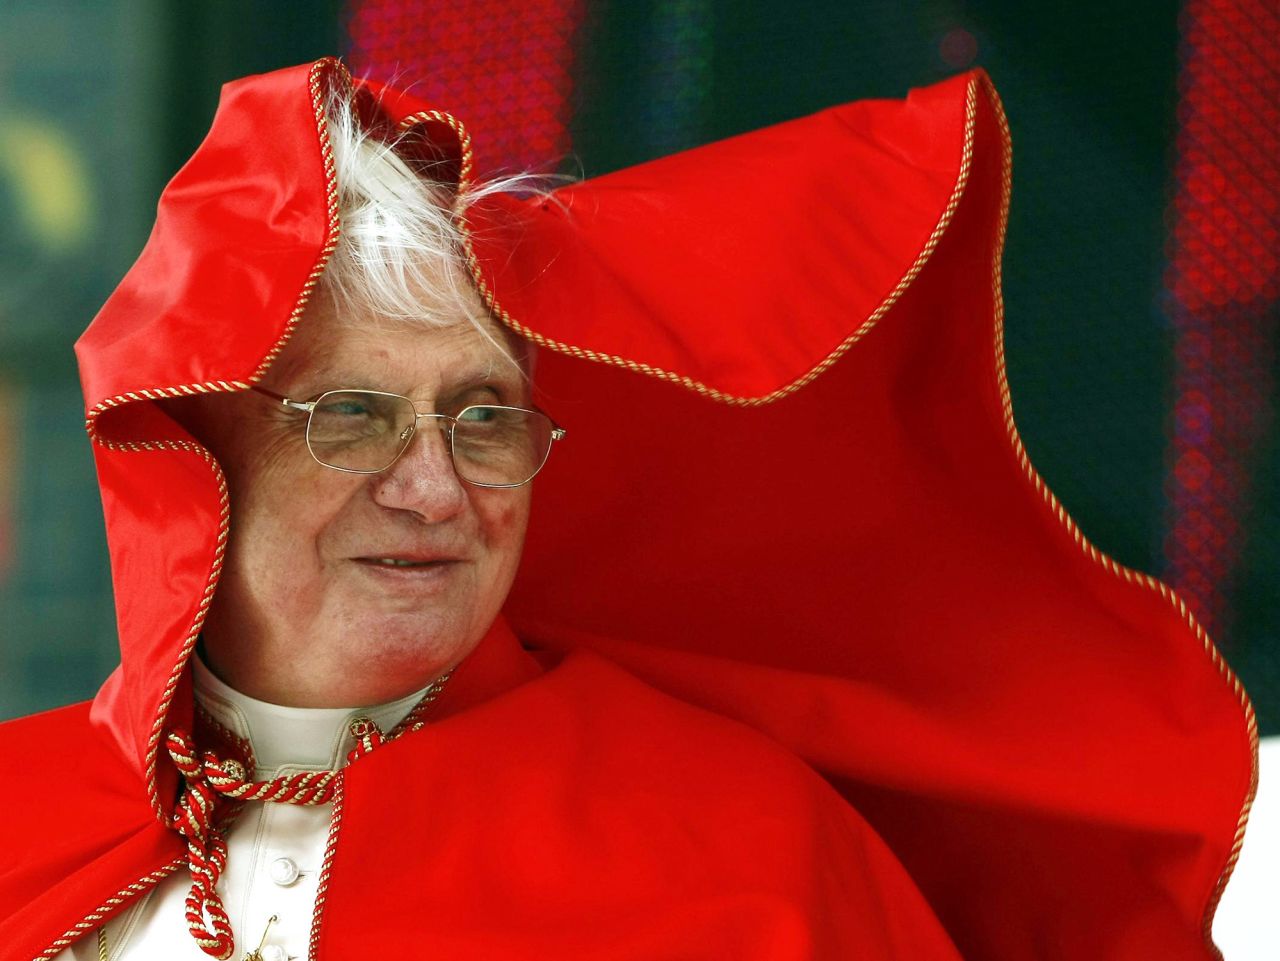 A gust of wind blows the Pope's coat over his head while visiting Vienna, Austria, in September 2007.